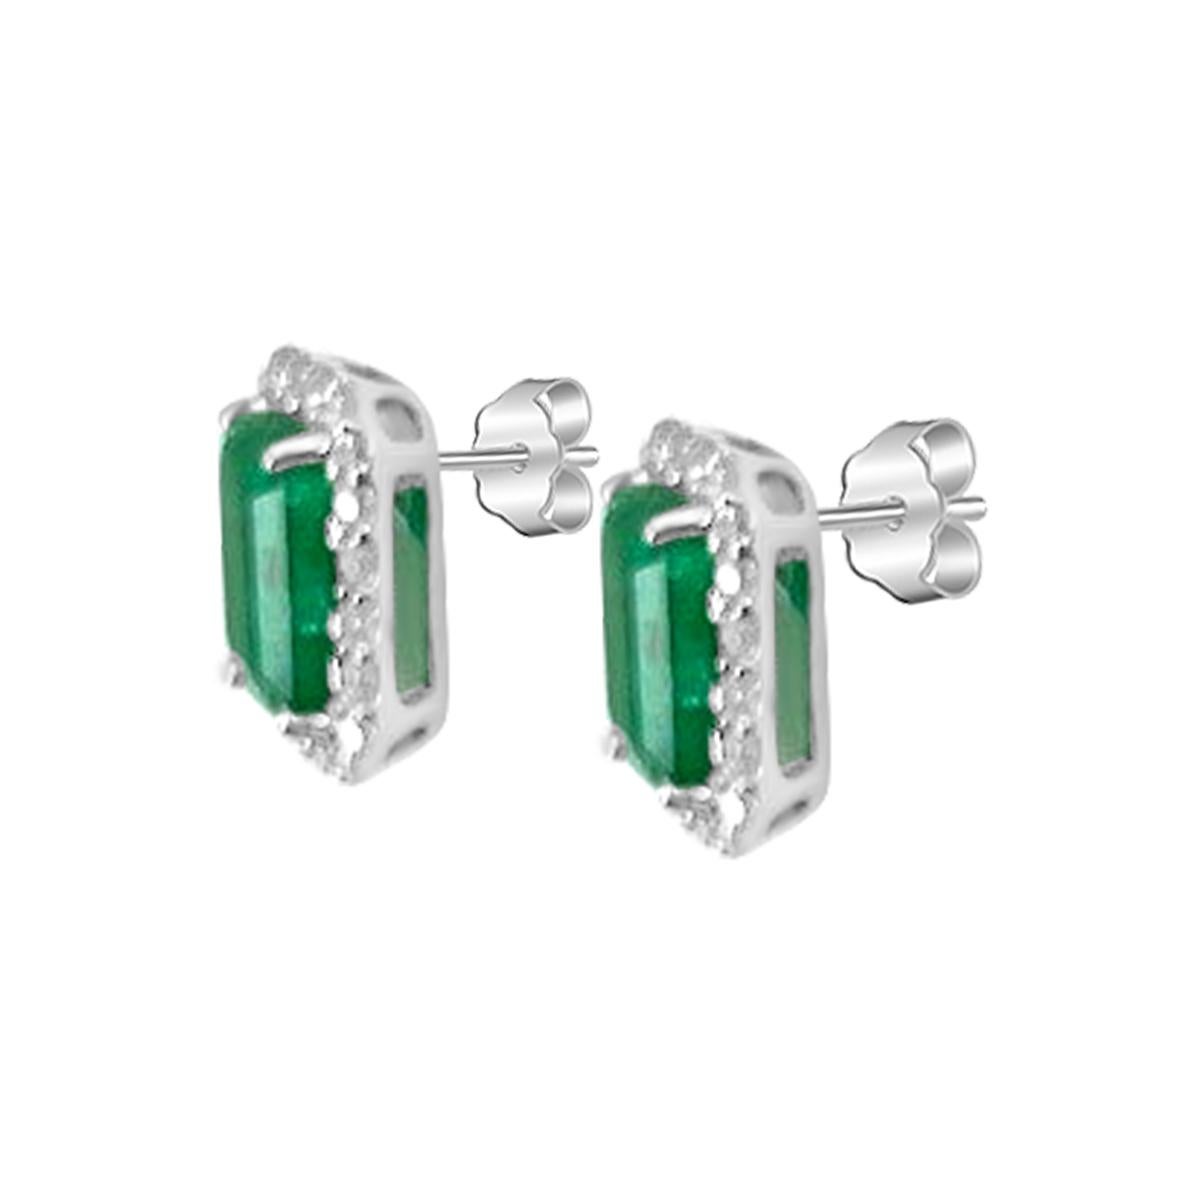 Featured Here Is A Stunning Emerald And Diamond Stud Earring In Fine 14K White Gold Displayed Are Vivacious Green 7X5mm Emerald Accented By A Simple Four Prong Setting. 
These Emeralds Have A Desirable Lush Green Color With Execellent Qualities